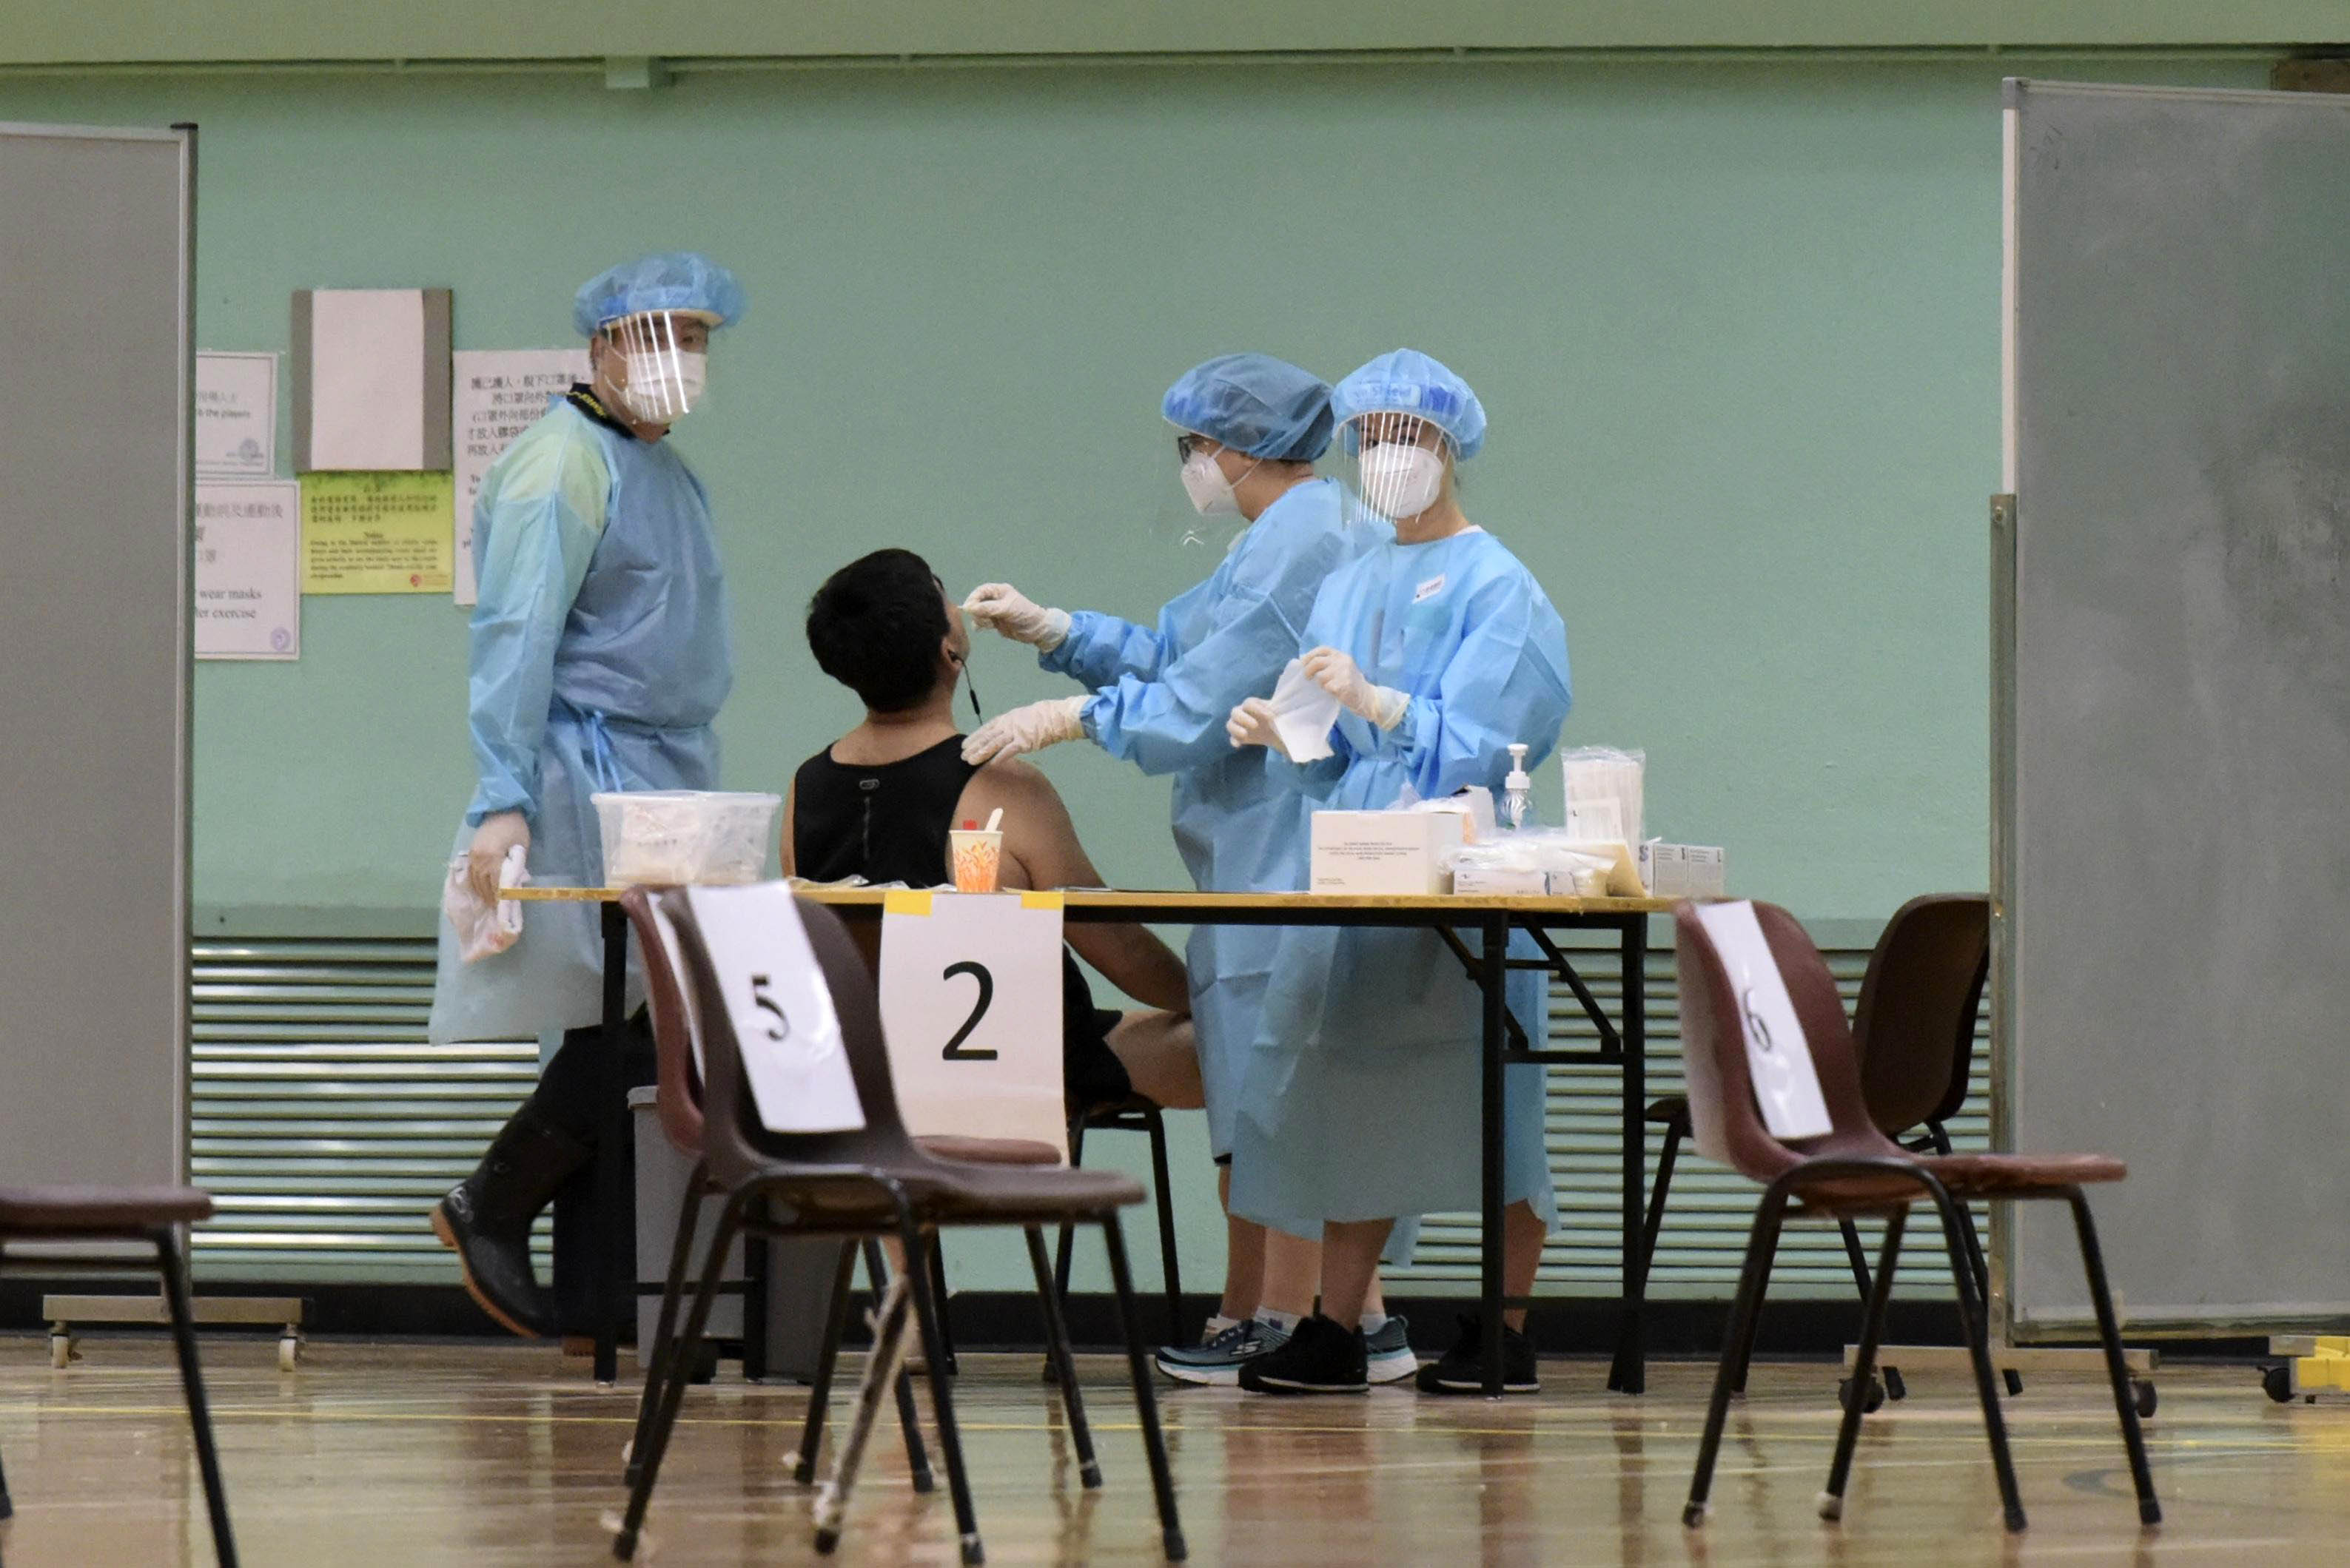 A person in Hong Kong gets tested for Covid-19 on September 8.